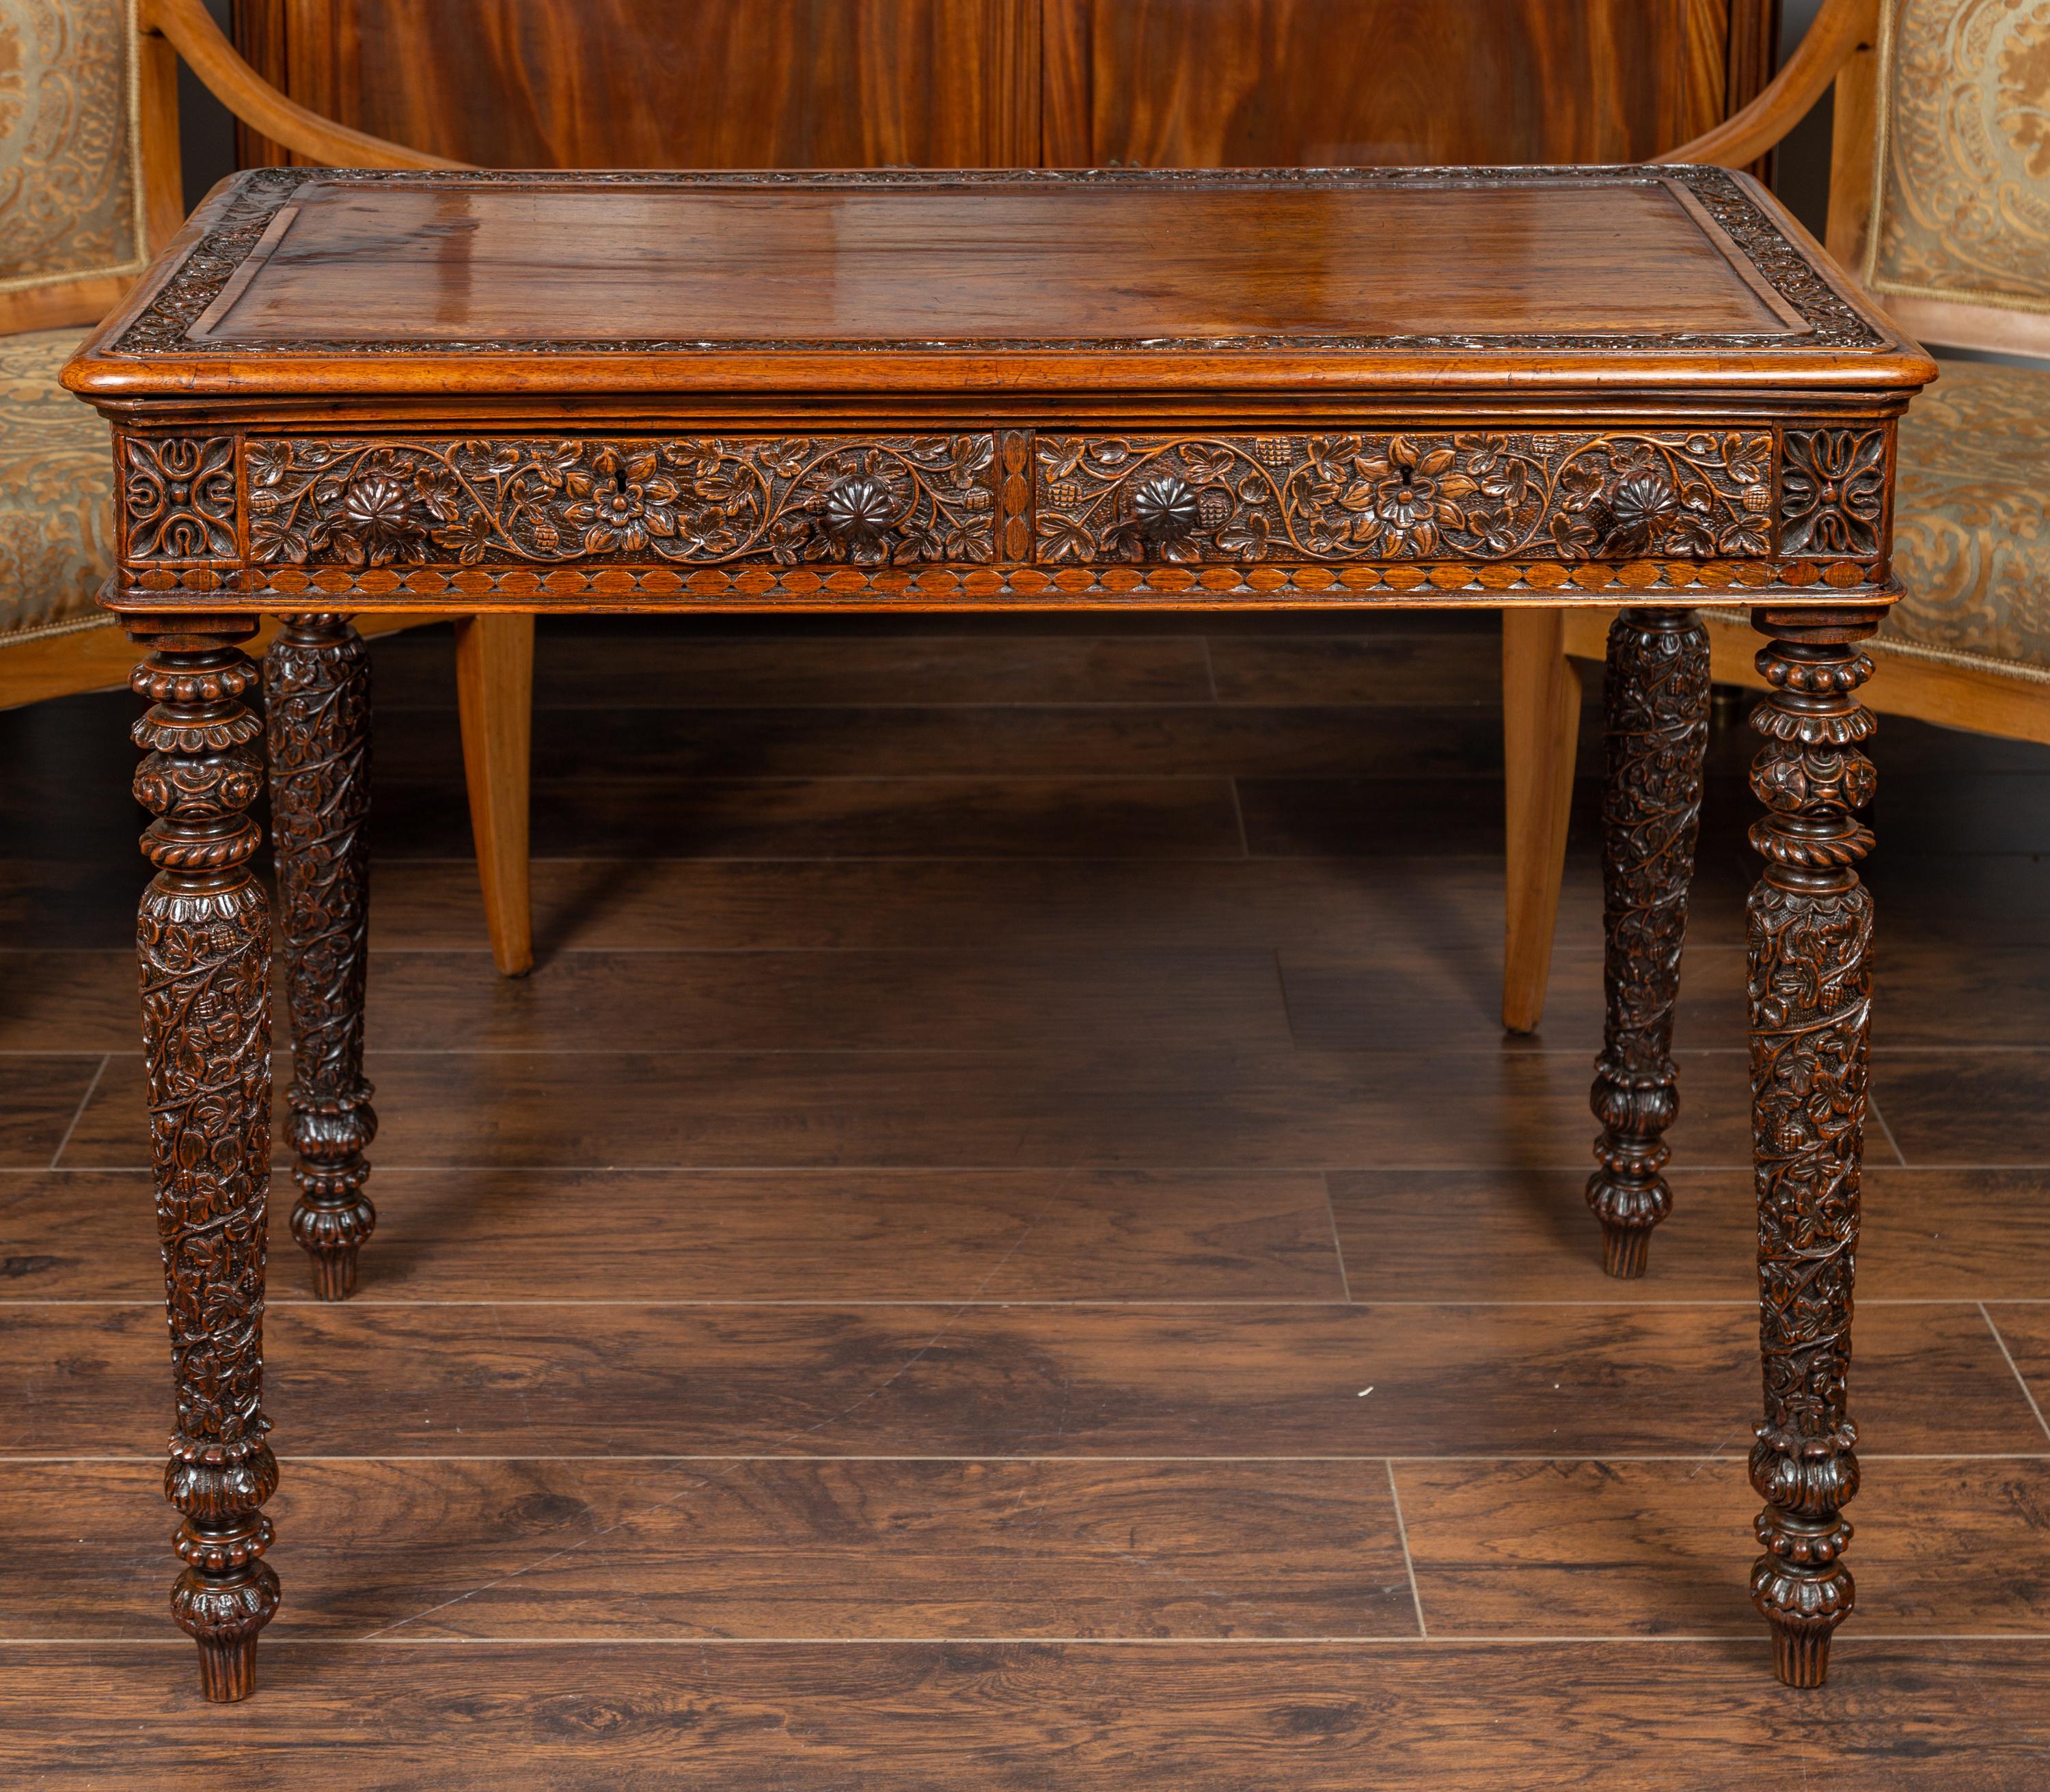 An Anglo-Indian oak table from the early 20th century, with two drawers and richly carved foliage decor. Born at the turn of the century, this exquisite oak table features a rectangular top with rounded corners and delicately carved frame, sitting